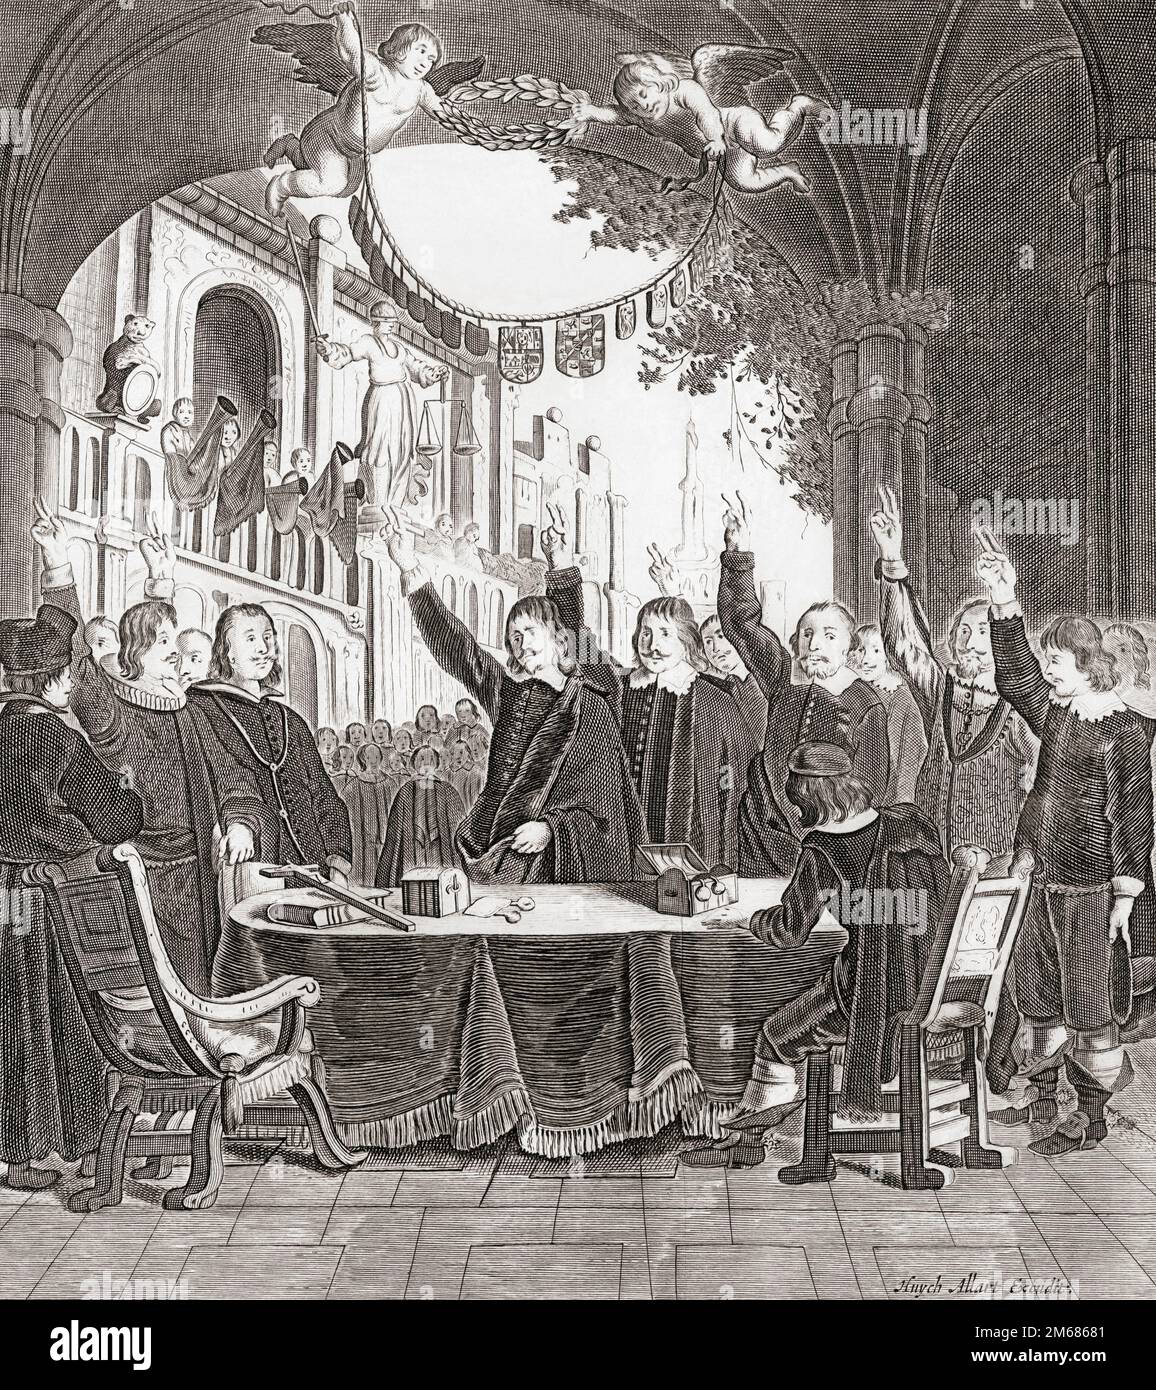 Delegates swearing the Oath of Ratification of the Peace of Munster, May 15, 1648, which ended the Eighty Years War between Spain and the Netherlands.  After a work by an unknown artist. Stock Photo